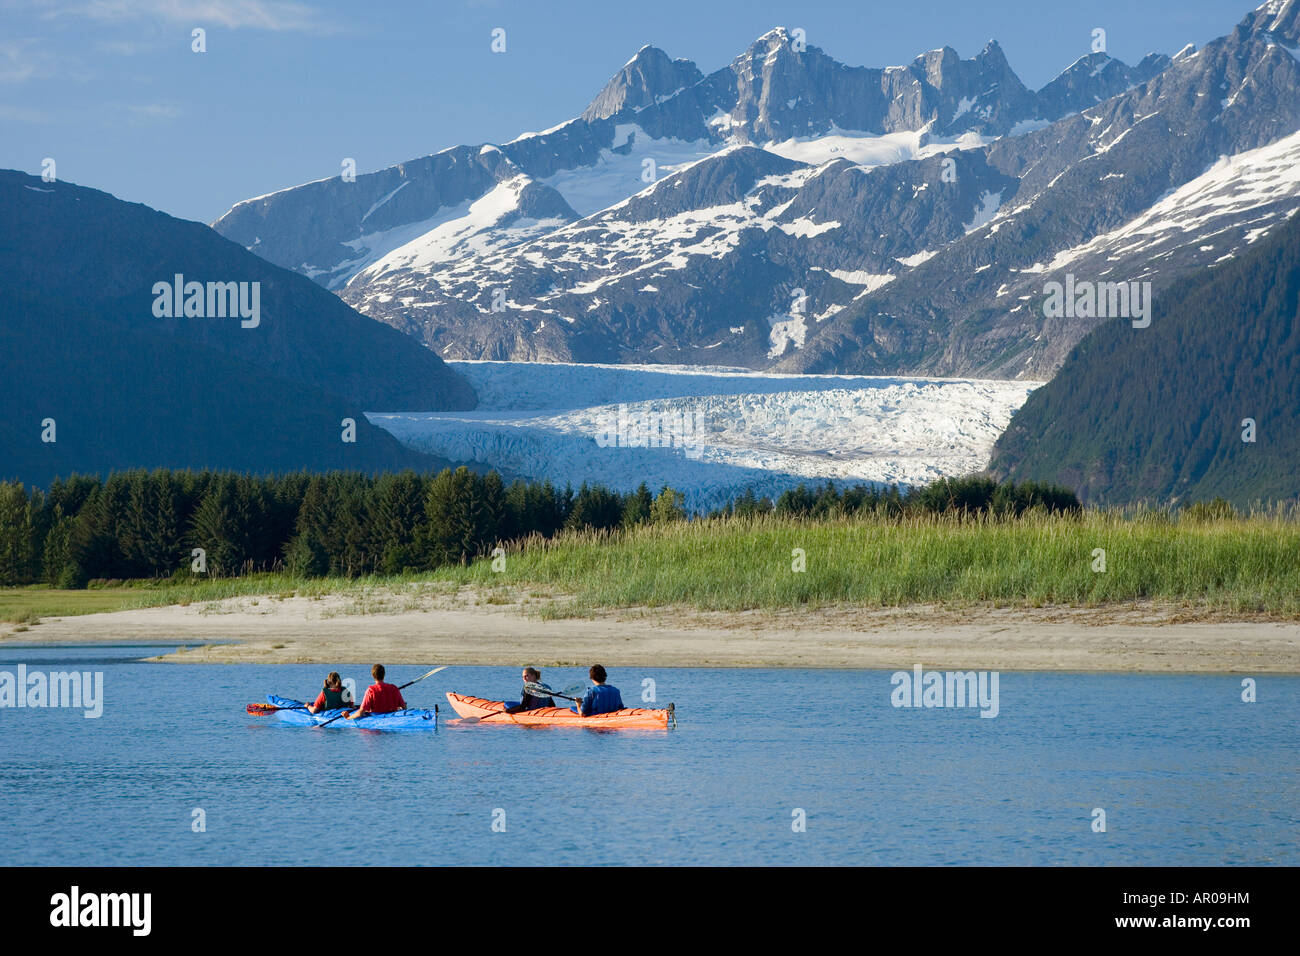 Kayakers kayaking in double sea-kayaks near Juneau in Inside Passage with view of Mendenhall Glacier Alaska Stock Photo